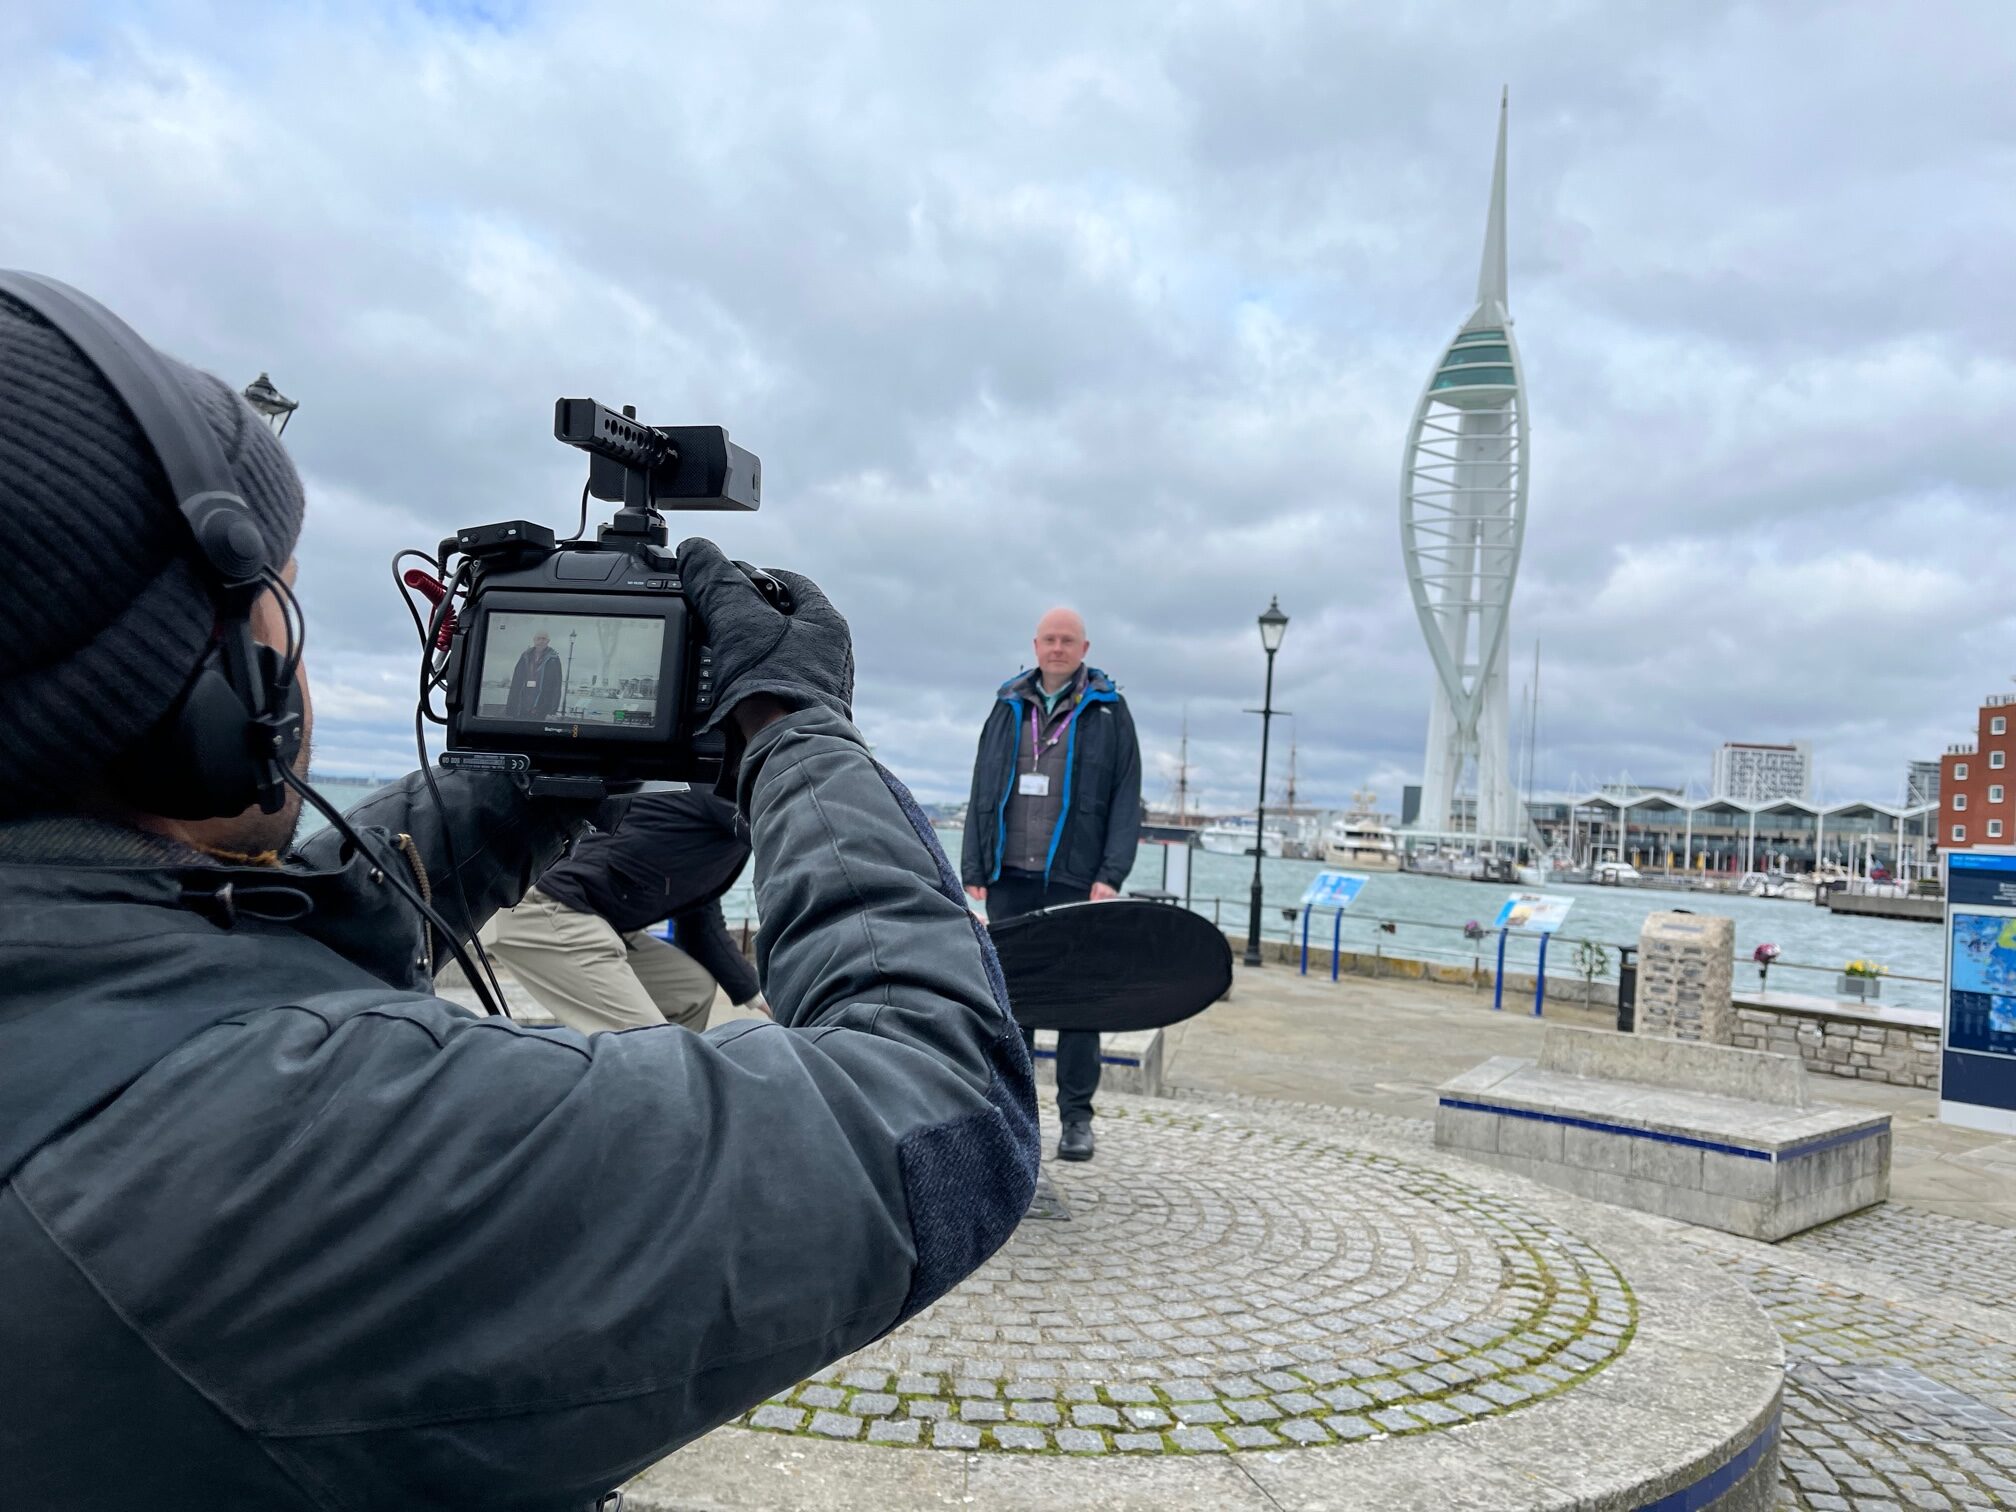 On location in Portsmouth